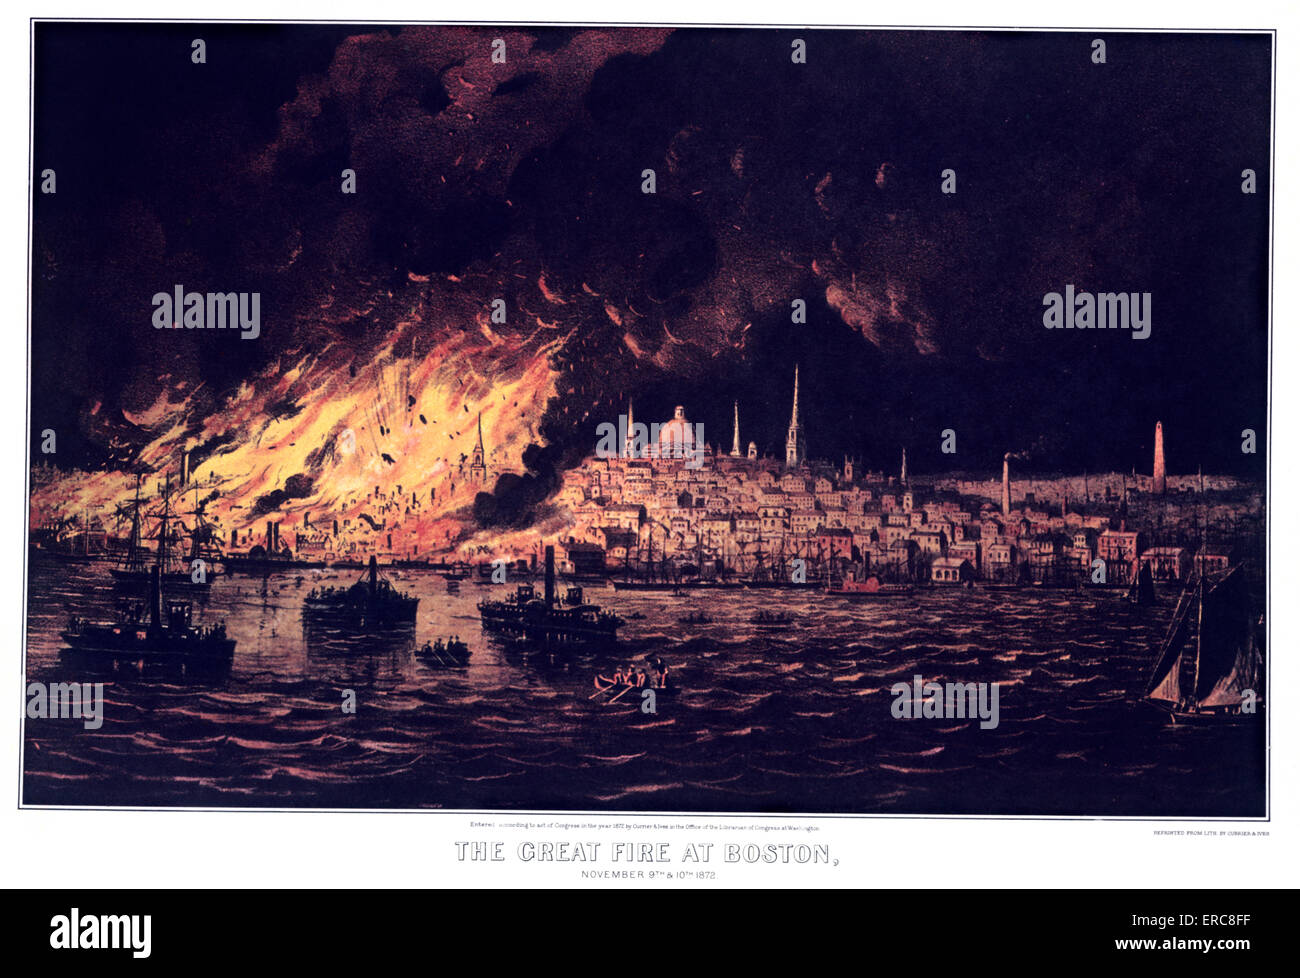 1870s THE GREAT FIRE AT BOSTON - CURRIER & IVES LITHOGRAPH - NOVEMBER 9TH & 10TH 1872 Stock Photo